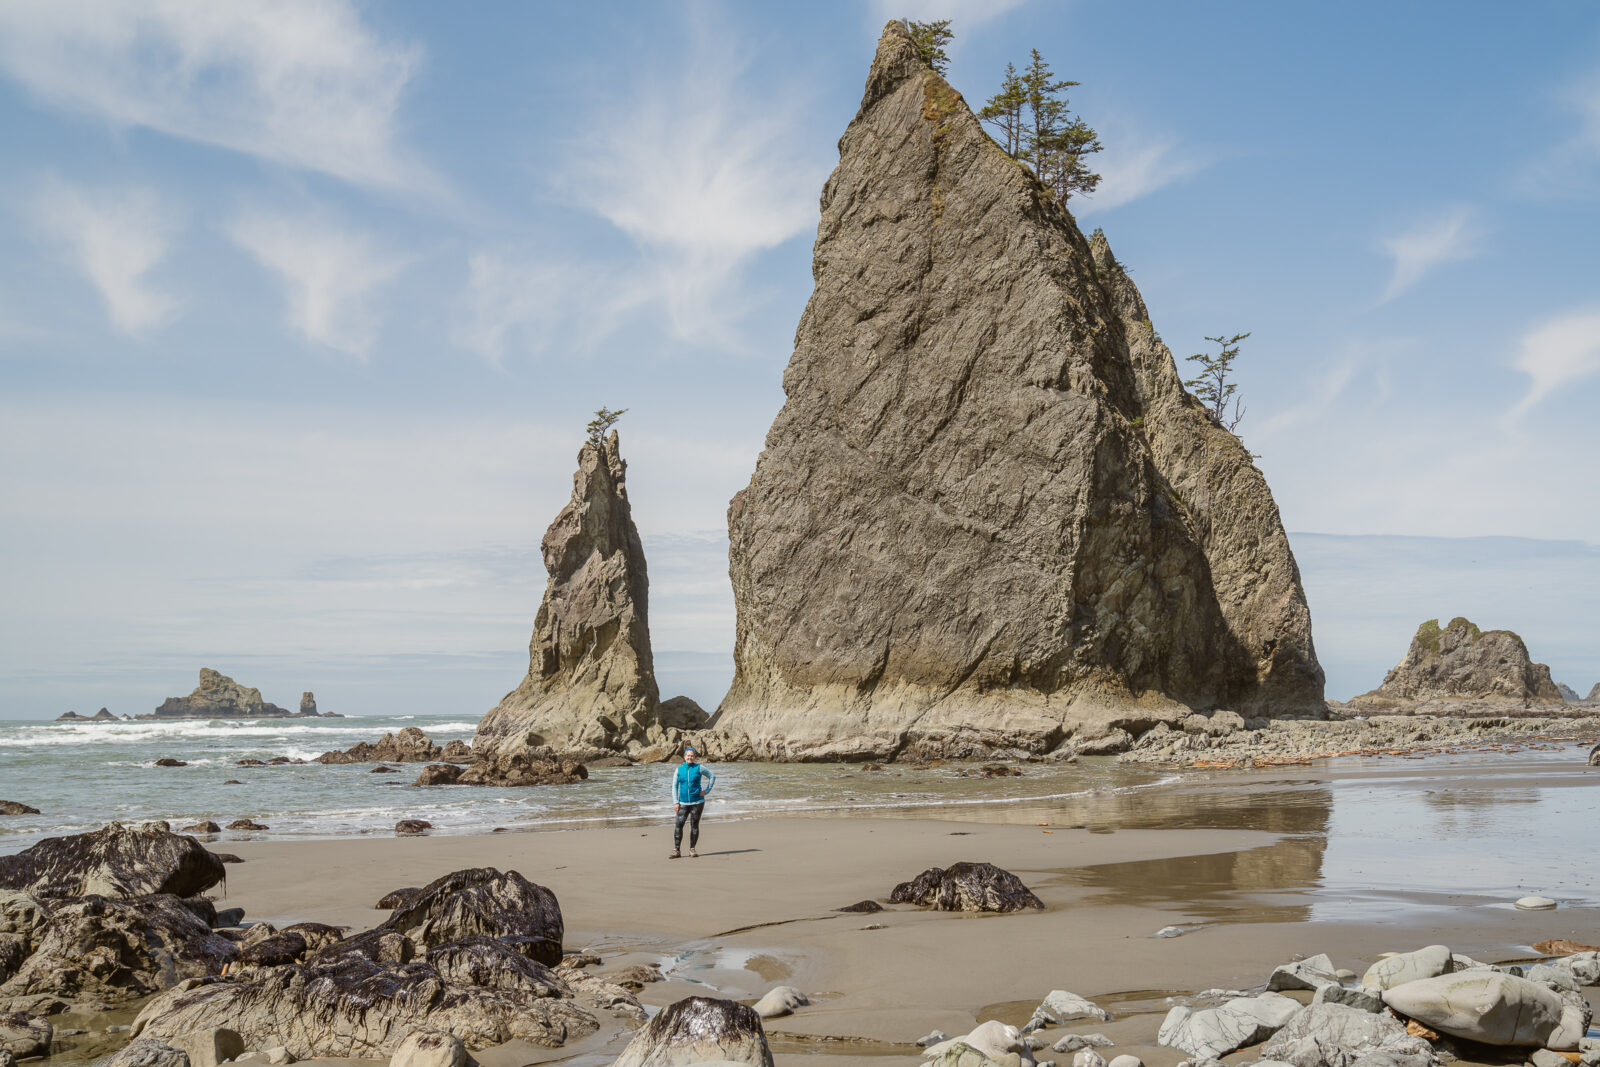 Outshined Photography at Rialto Beach